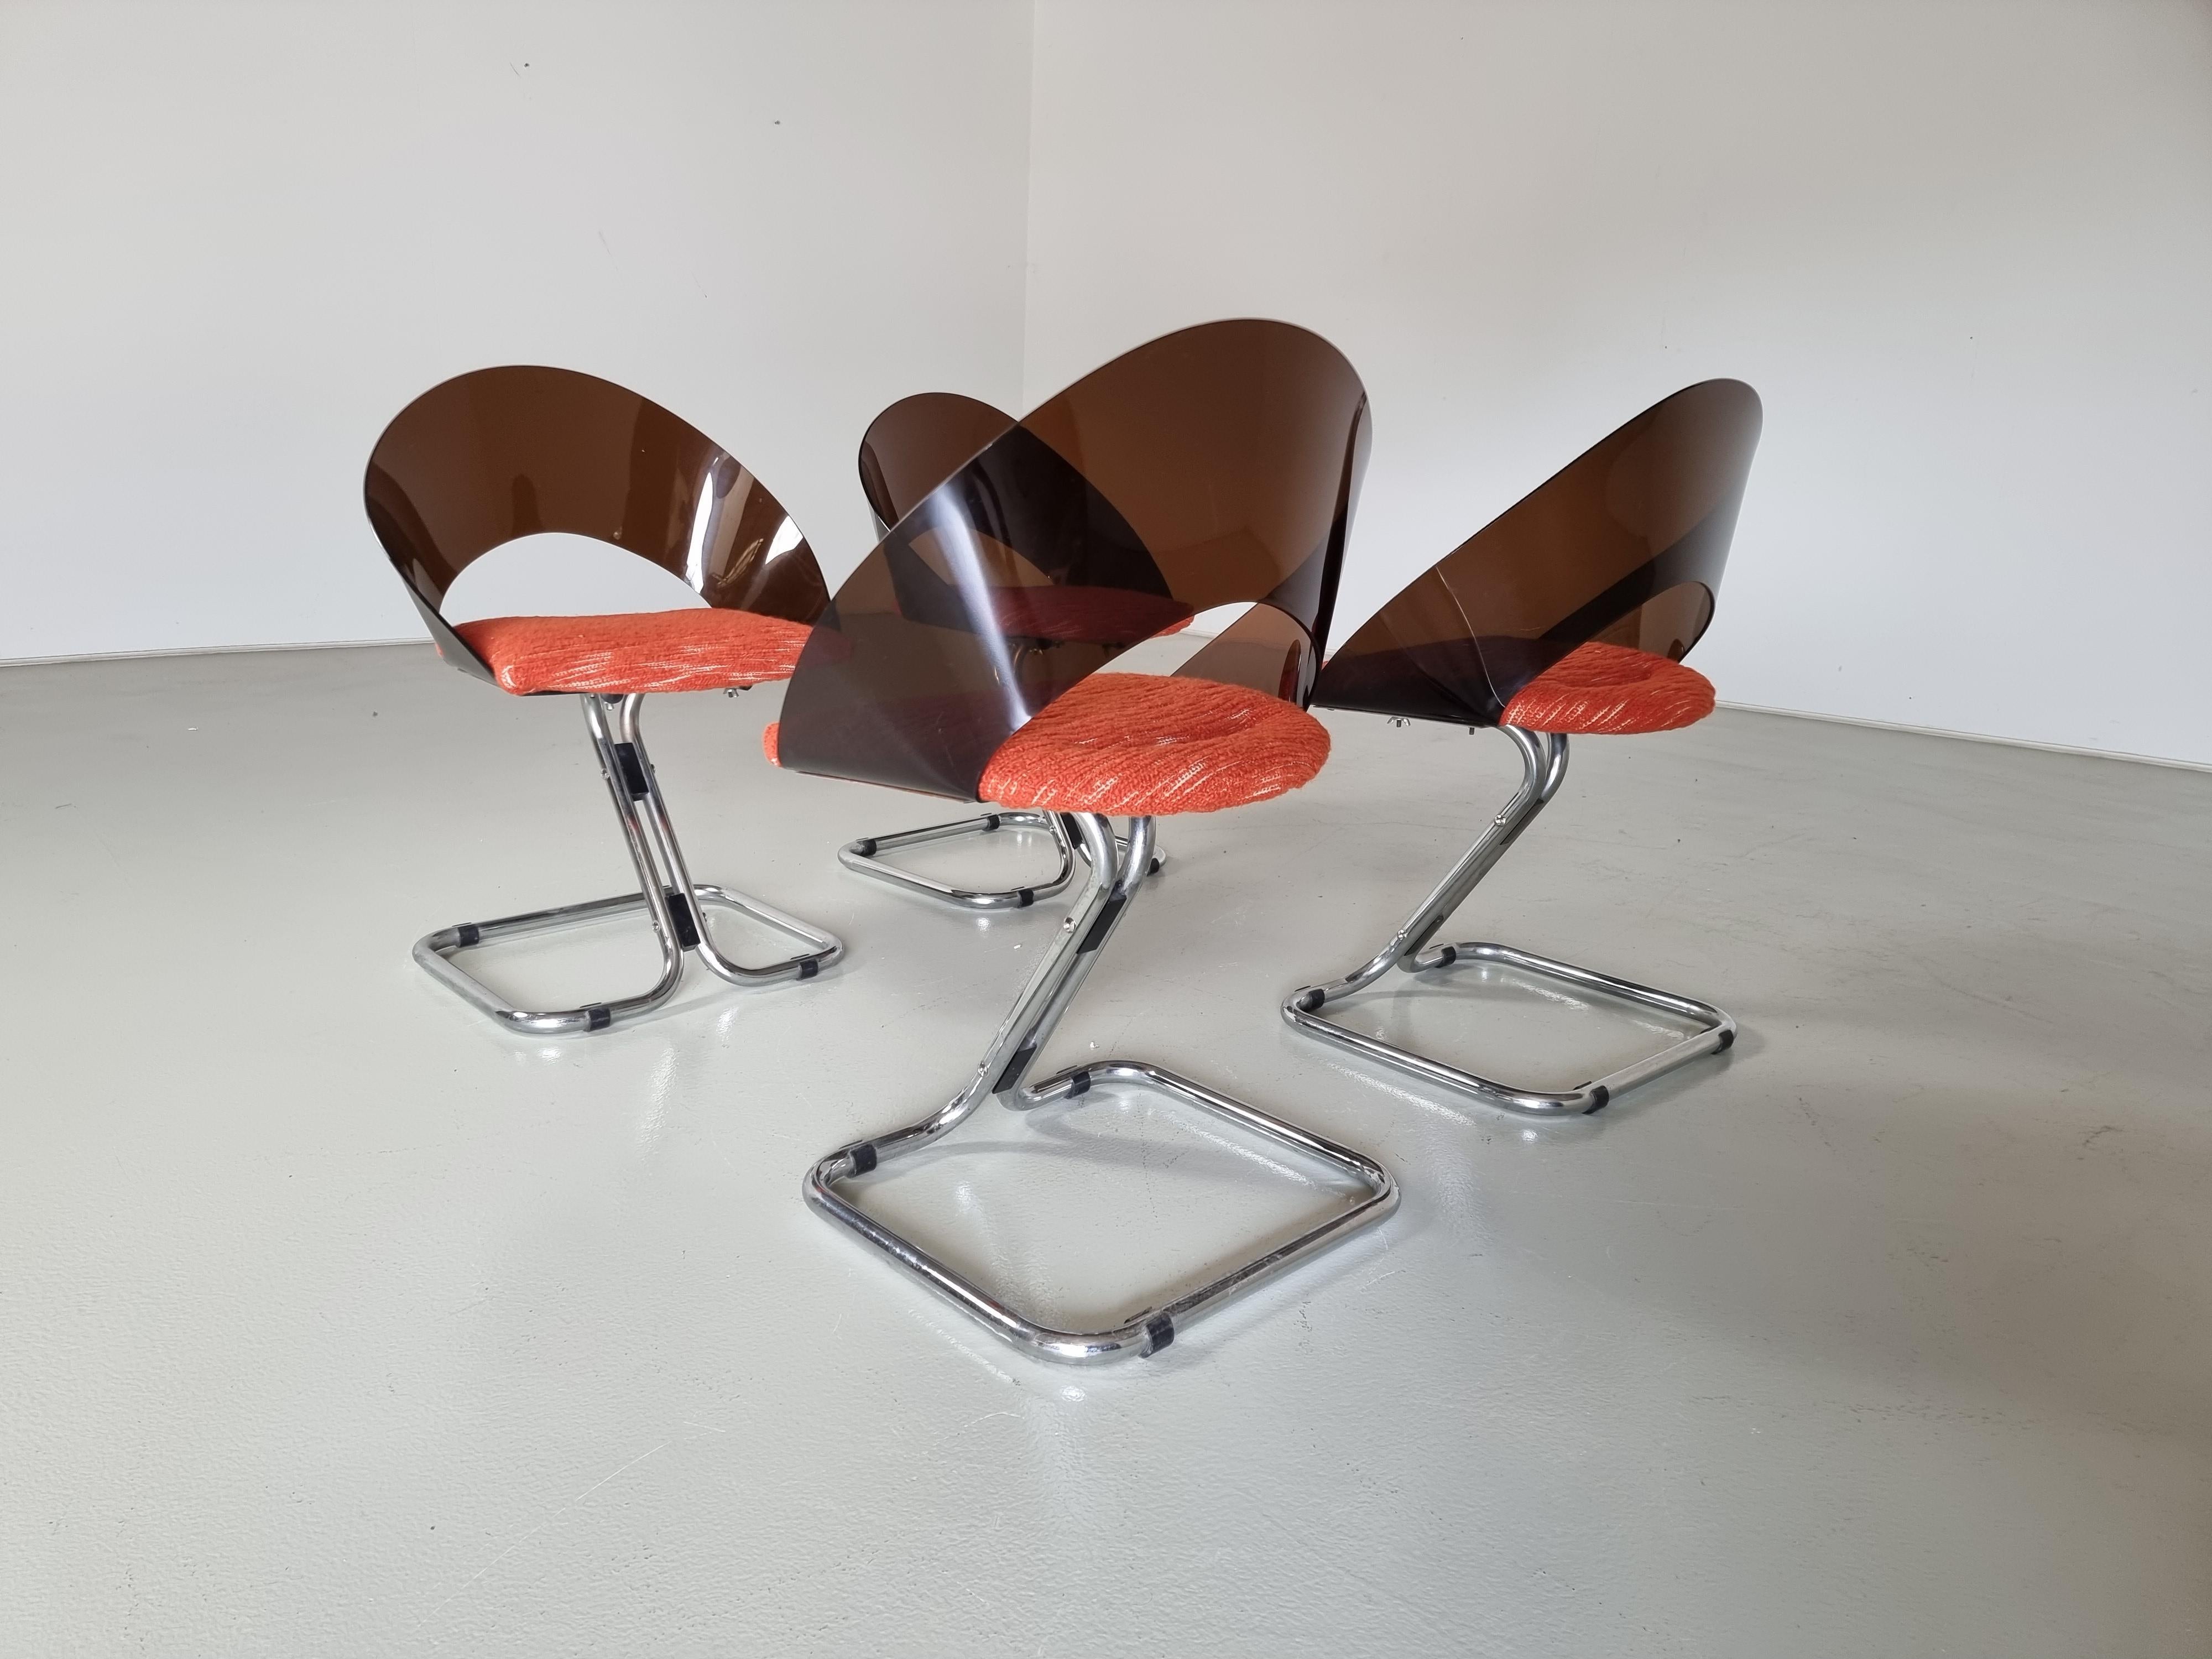 Set of 4 Italian Spage Age Plexiglass Dining Chairs, 1970s For Sale 1